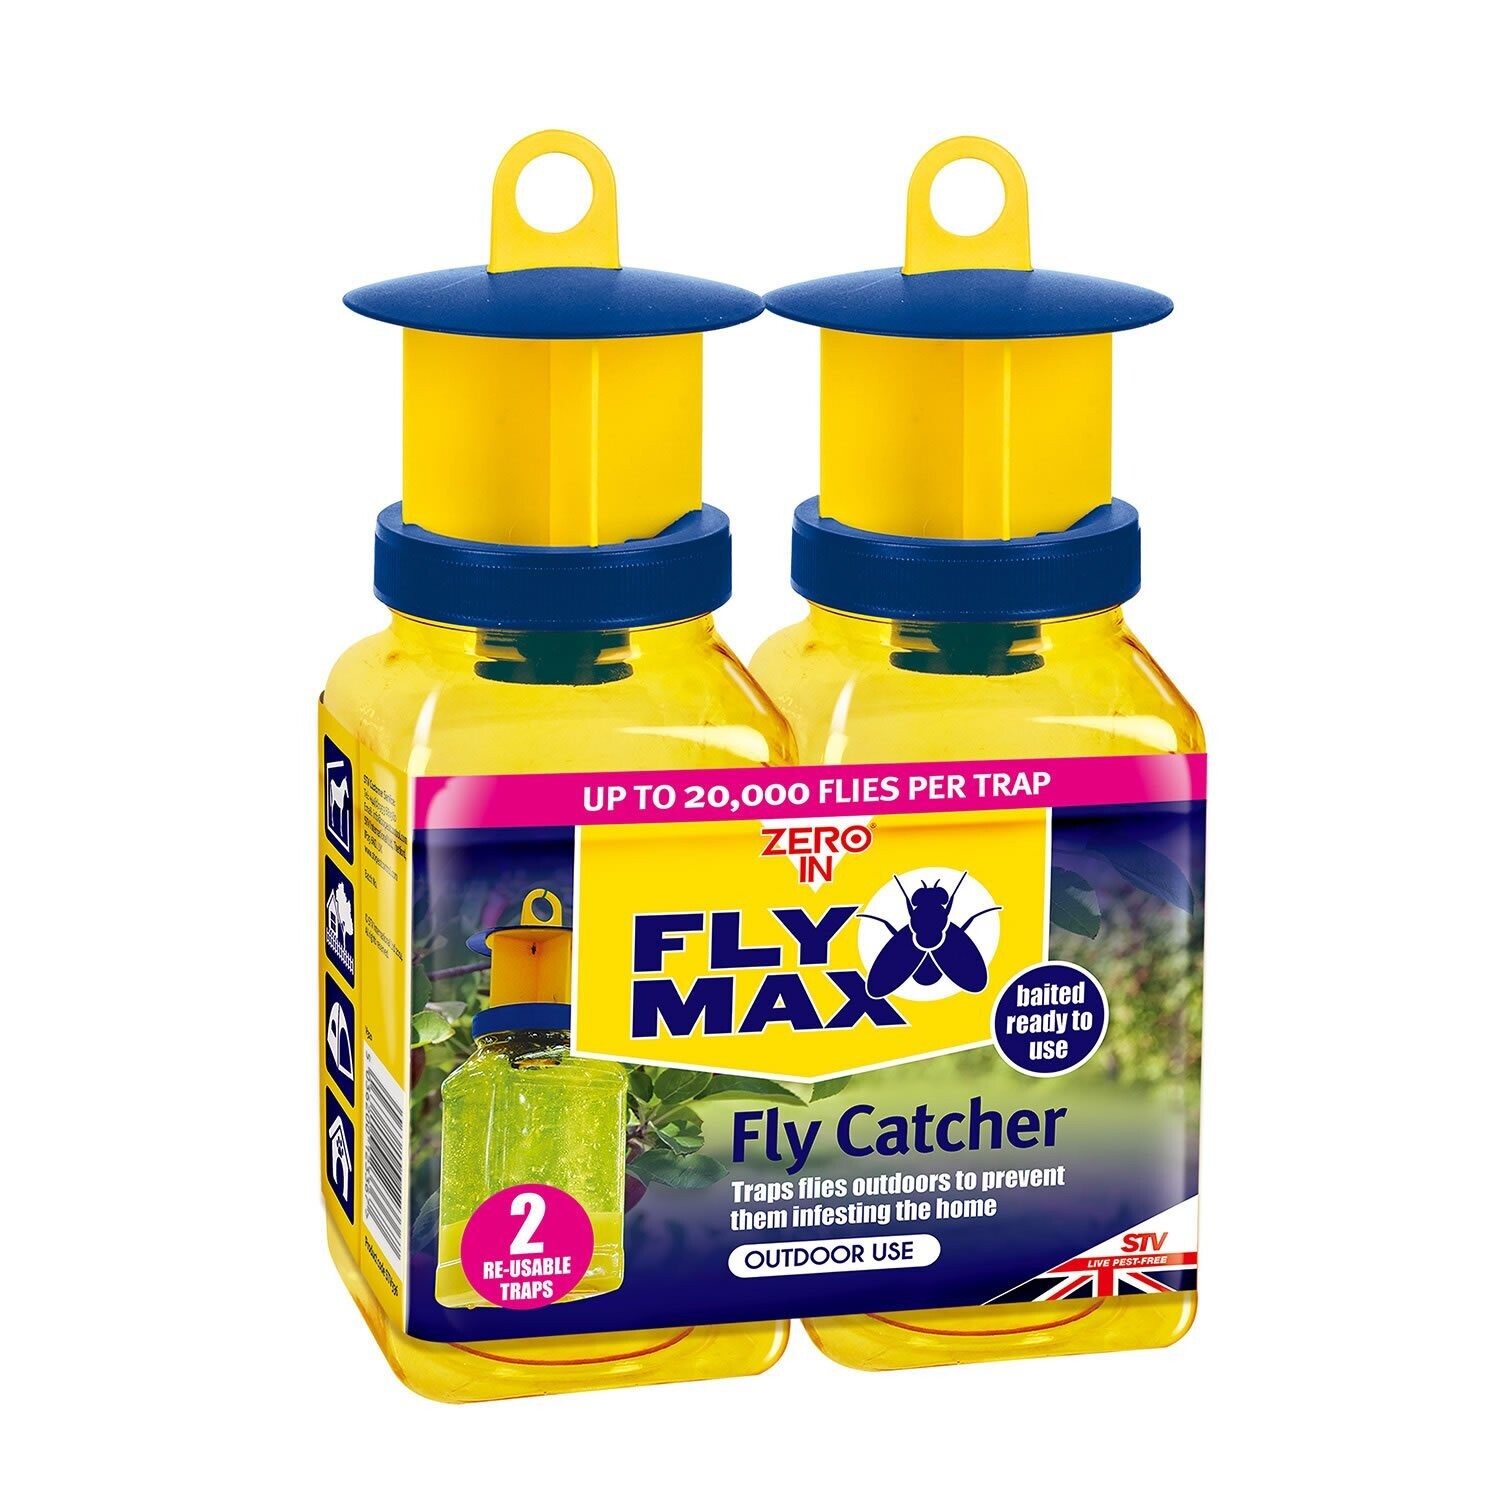 FLY MAX FLY CATCHER - 2 pack. Super effective fly attractant*